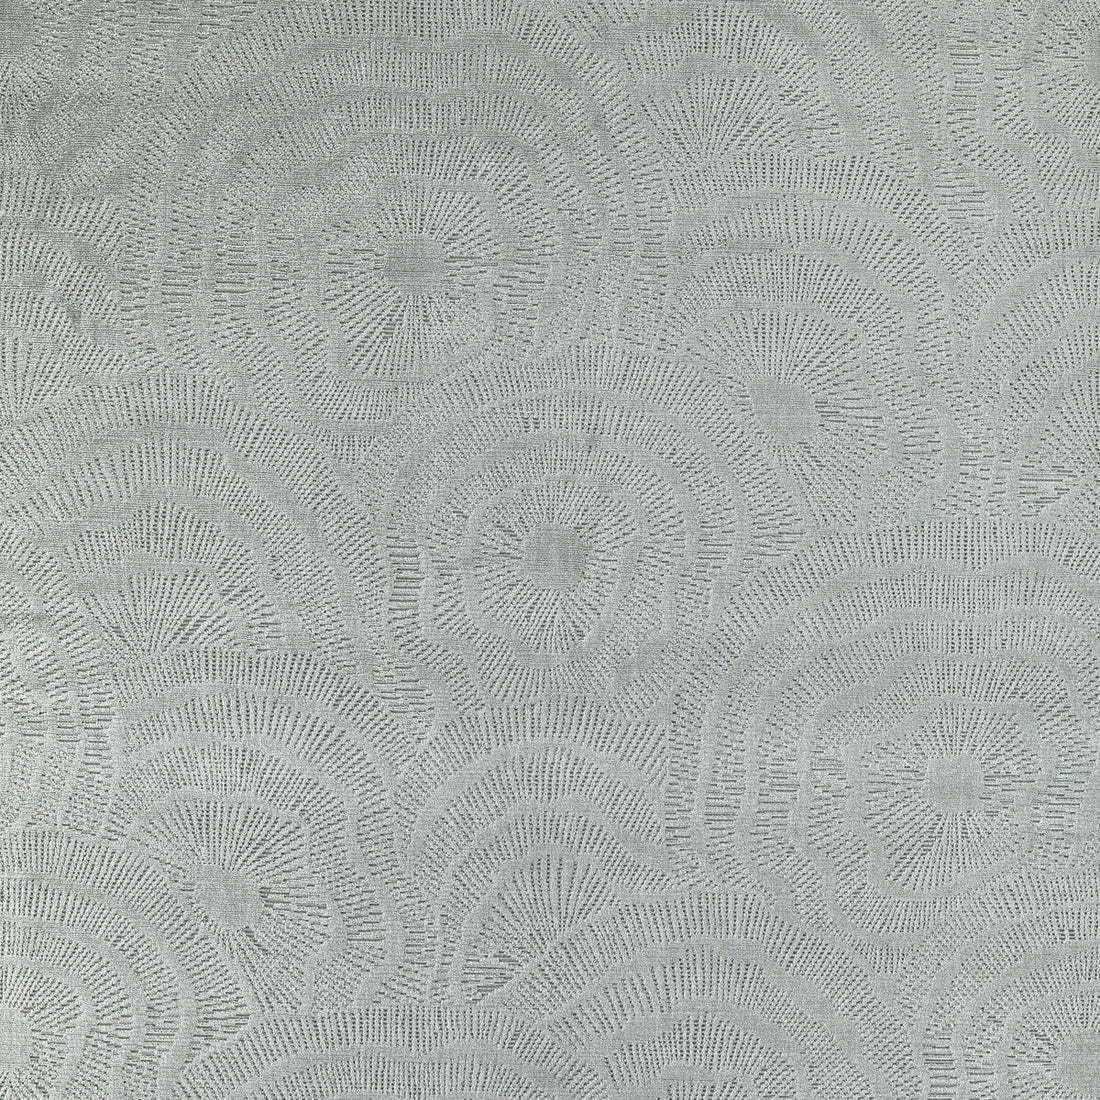 Panache Velvet fabric in pewter color - pattern 36366.11.0 - by Kravet Couture in the Corey Damen Jenkins Trad Nouveau collection